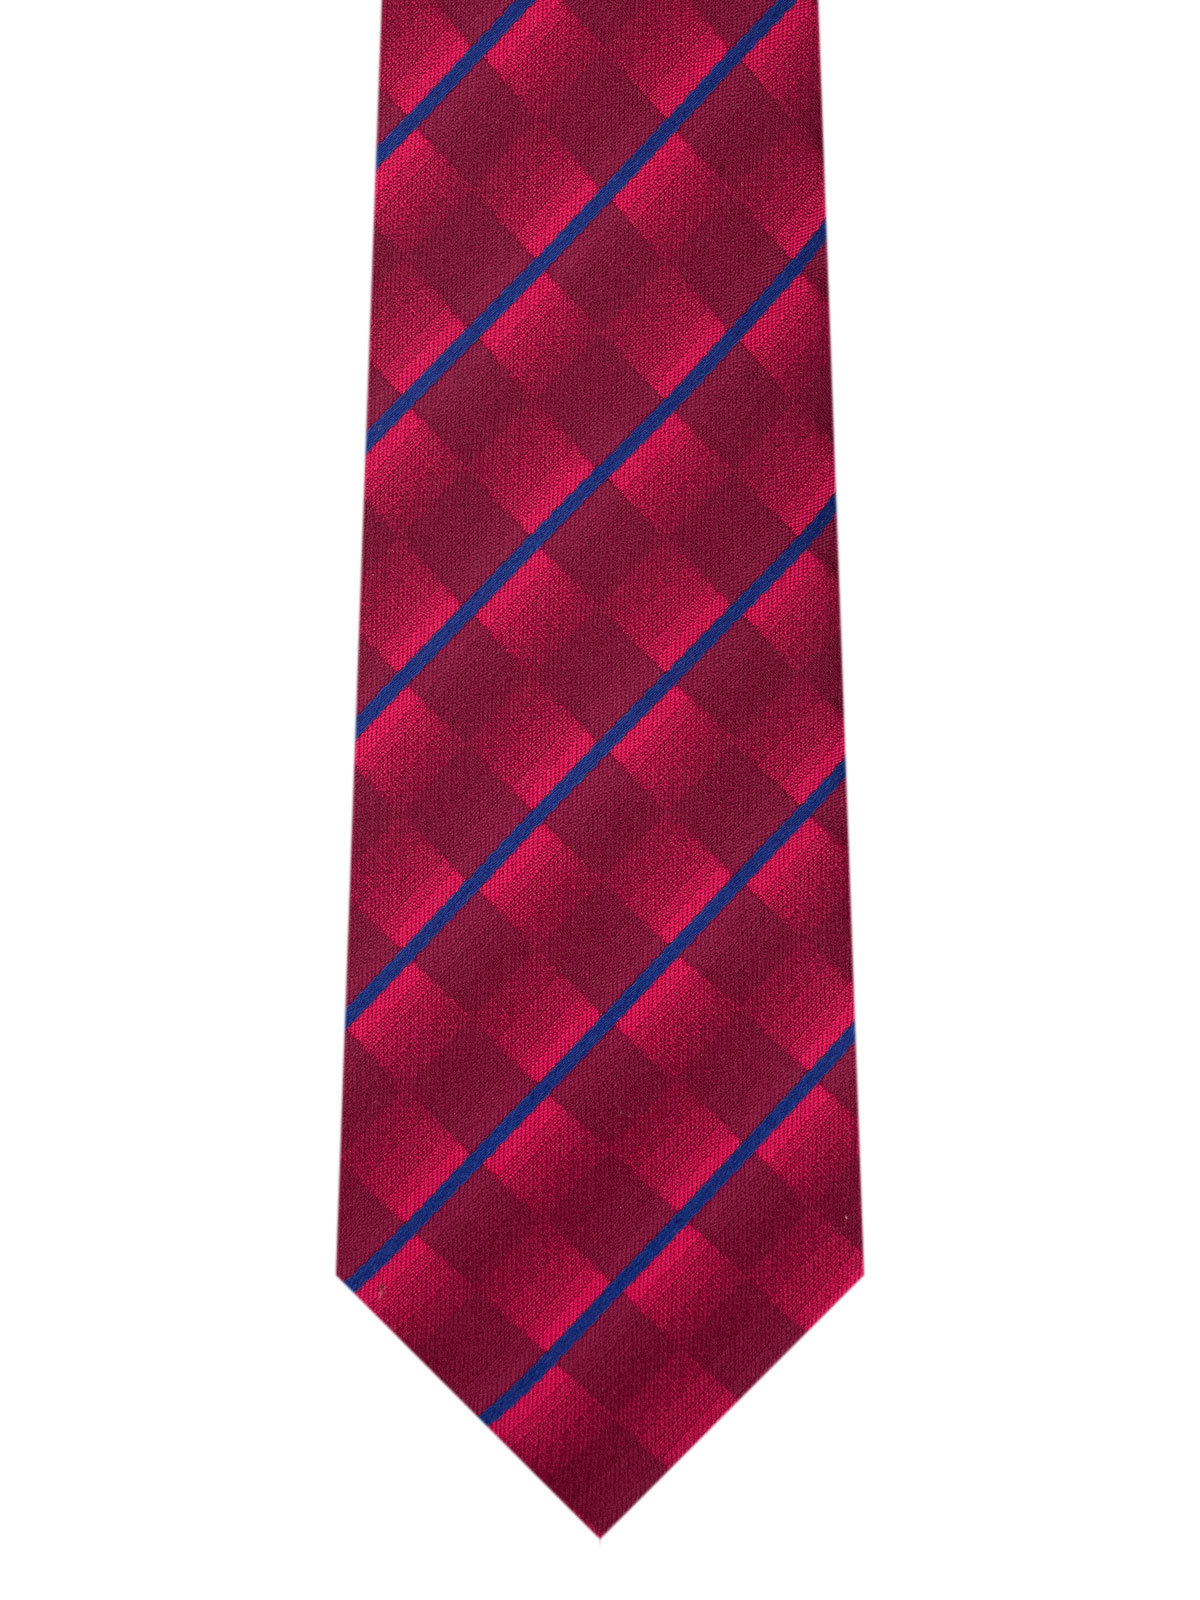 Tie with diagonal blue lines - 10179 - € 14.06 img2